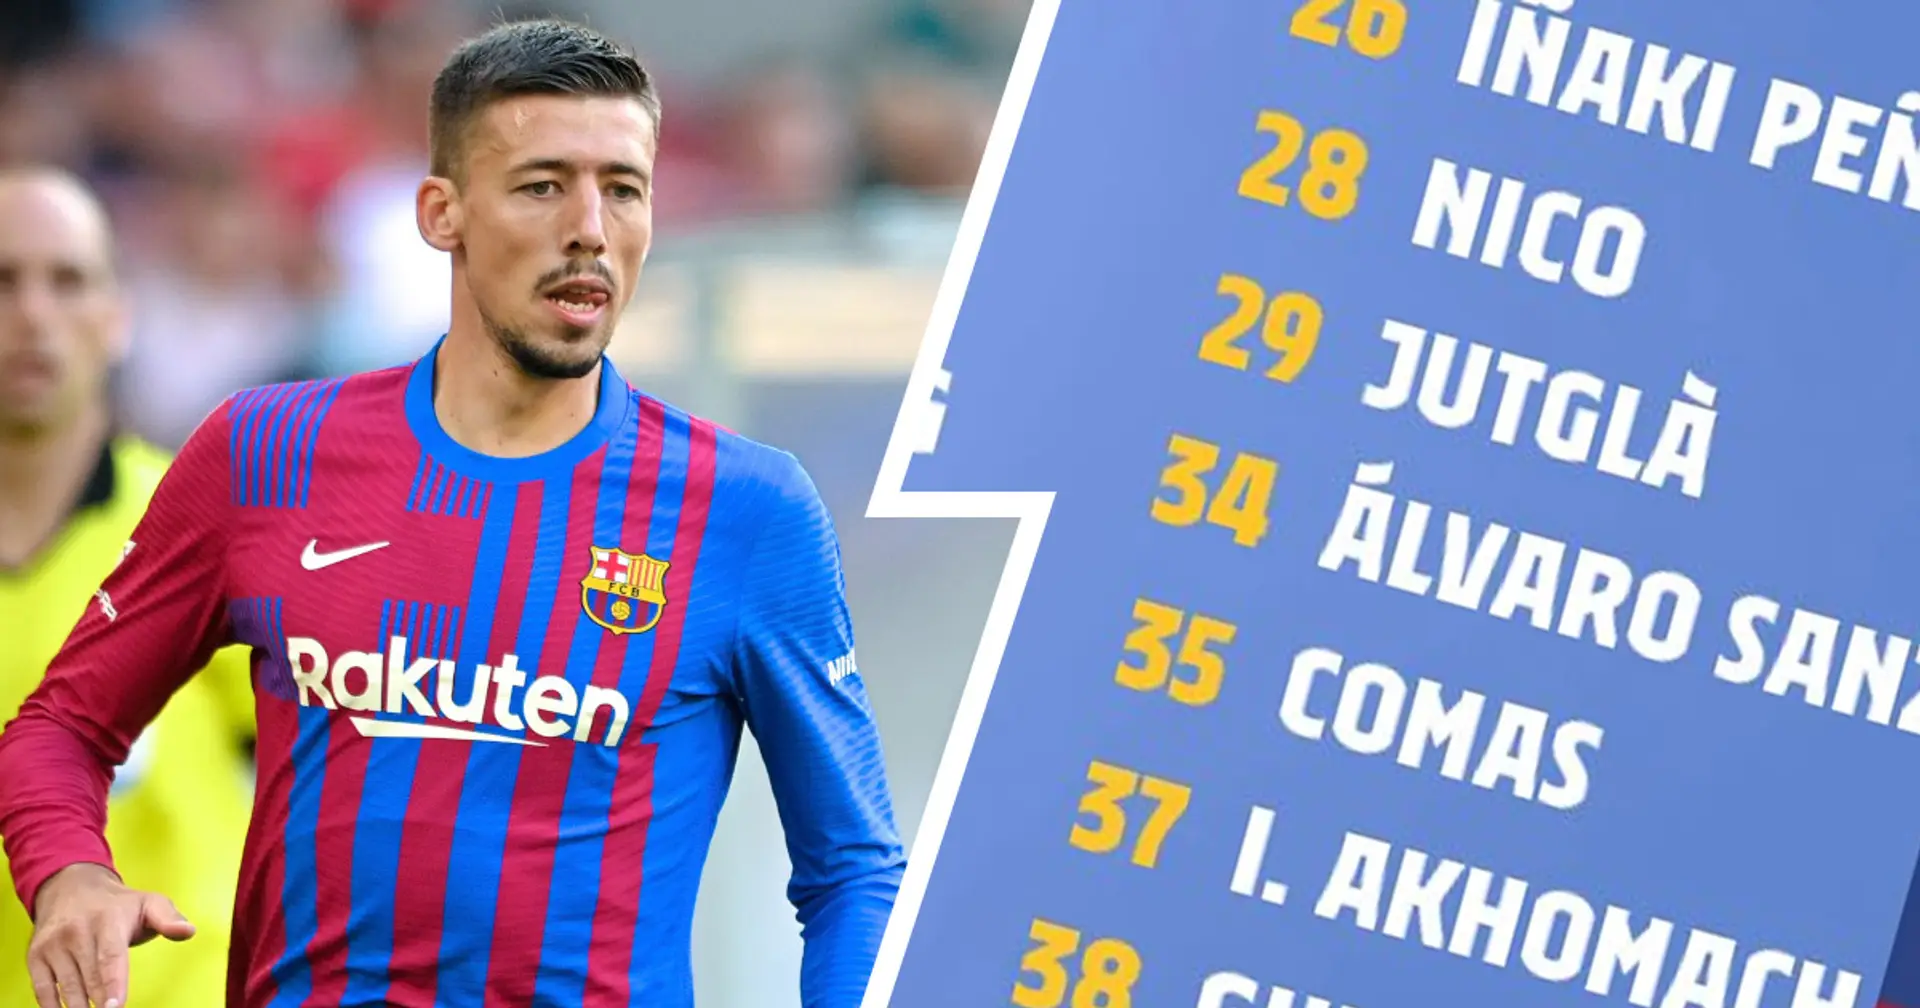 Just 11 first-team players available as Barca's squad for Mallorca revealed